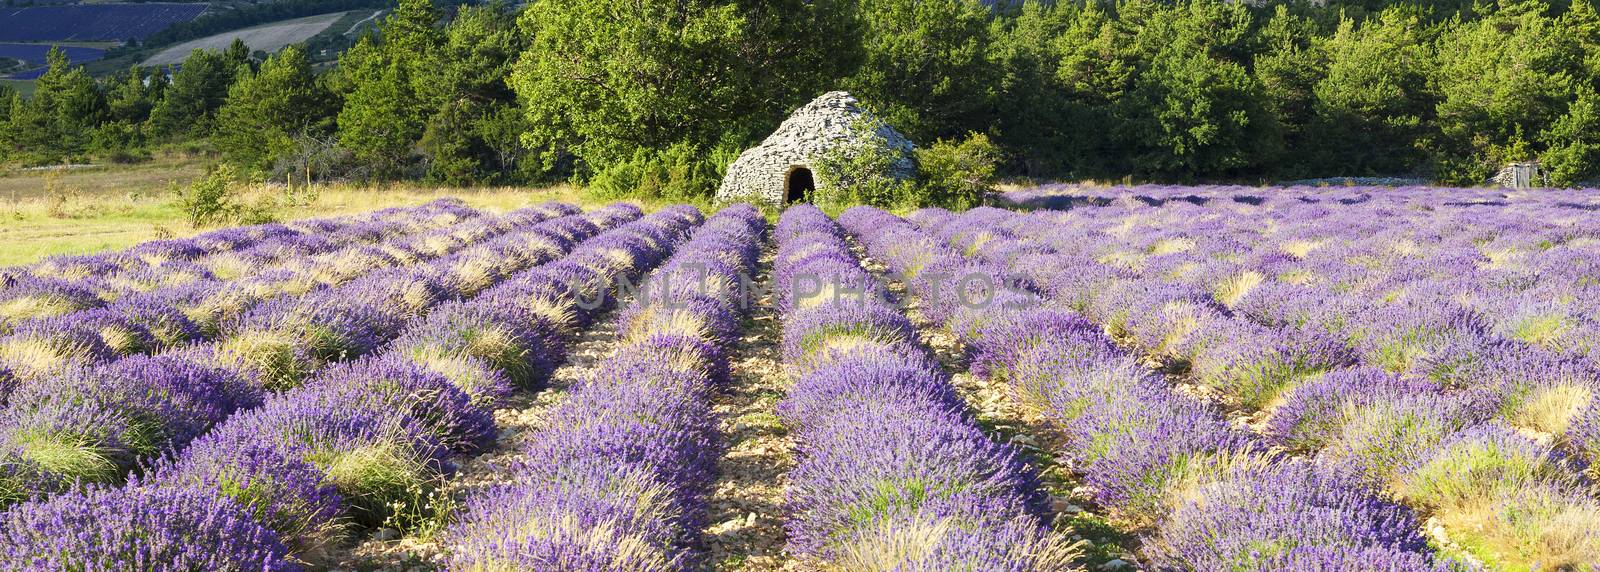 Panoramic view of Lavender field by vwalakte